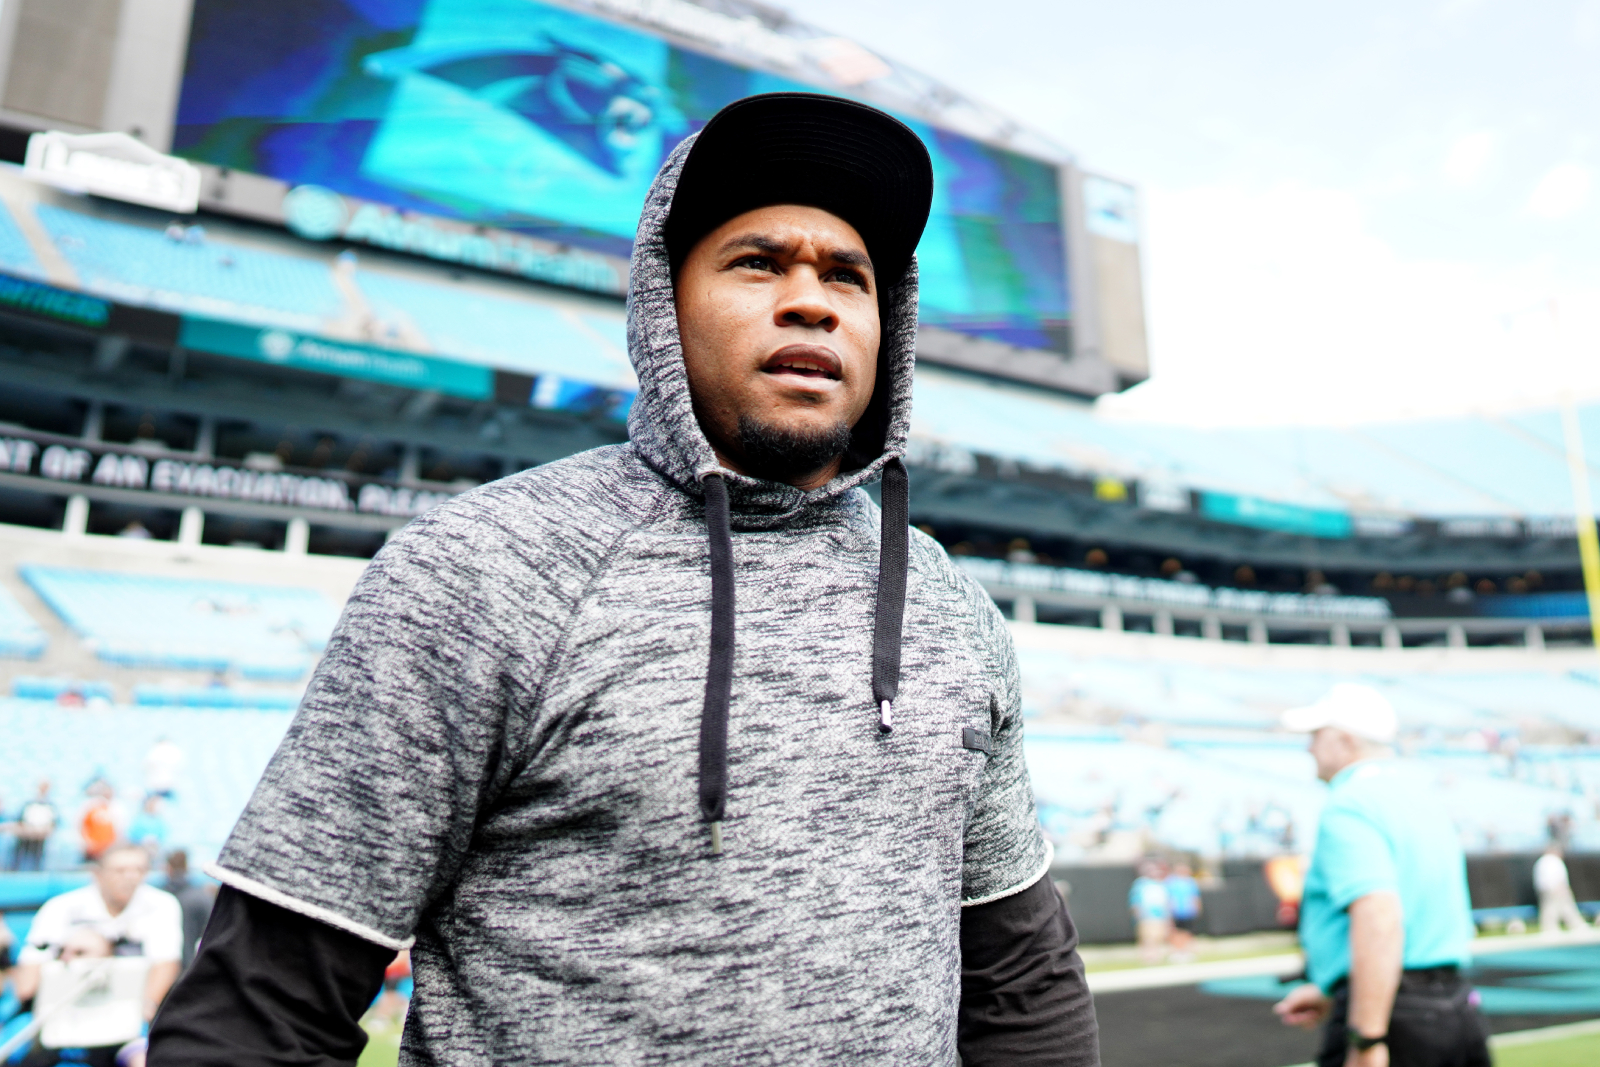 Steve Smith was a legendary receiver for the Carolina Panthers. He recently took a shot at another former Panthers receiver, Kelvin Benjamin.